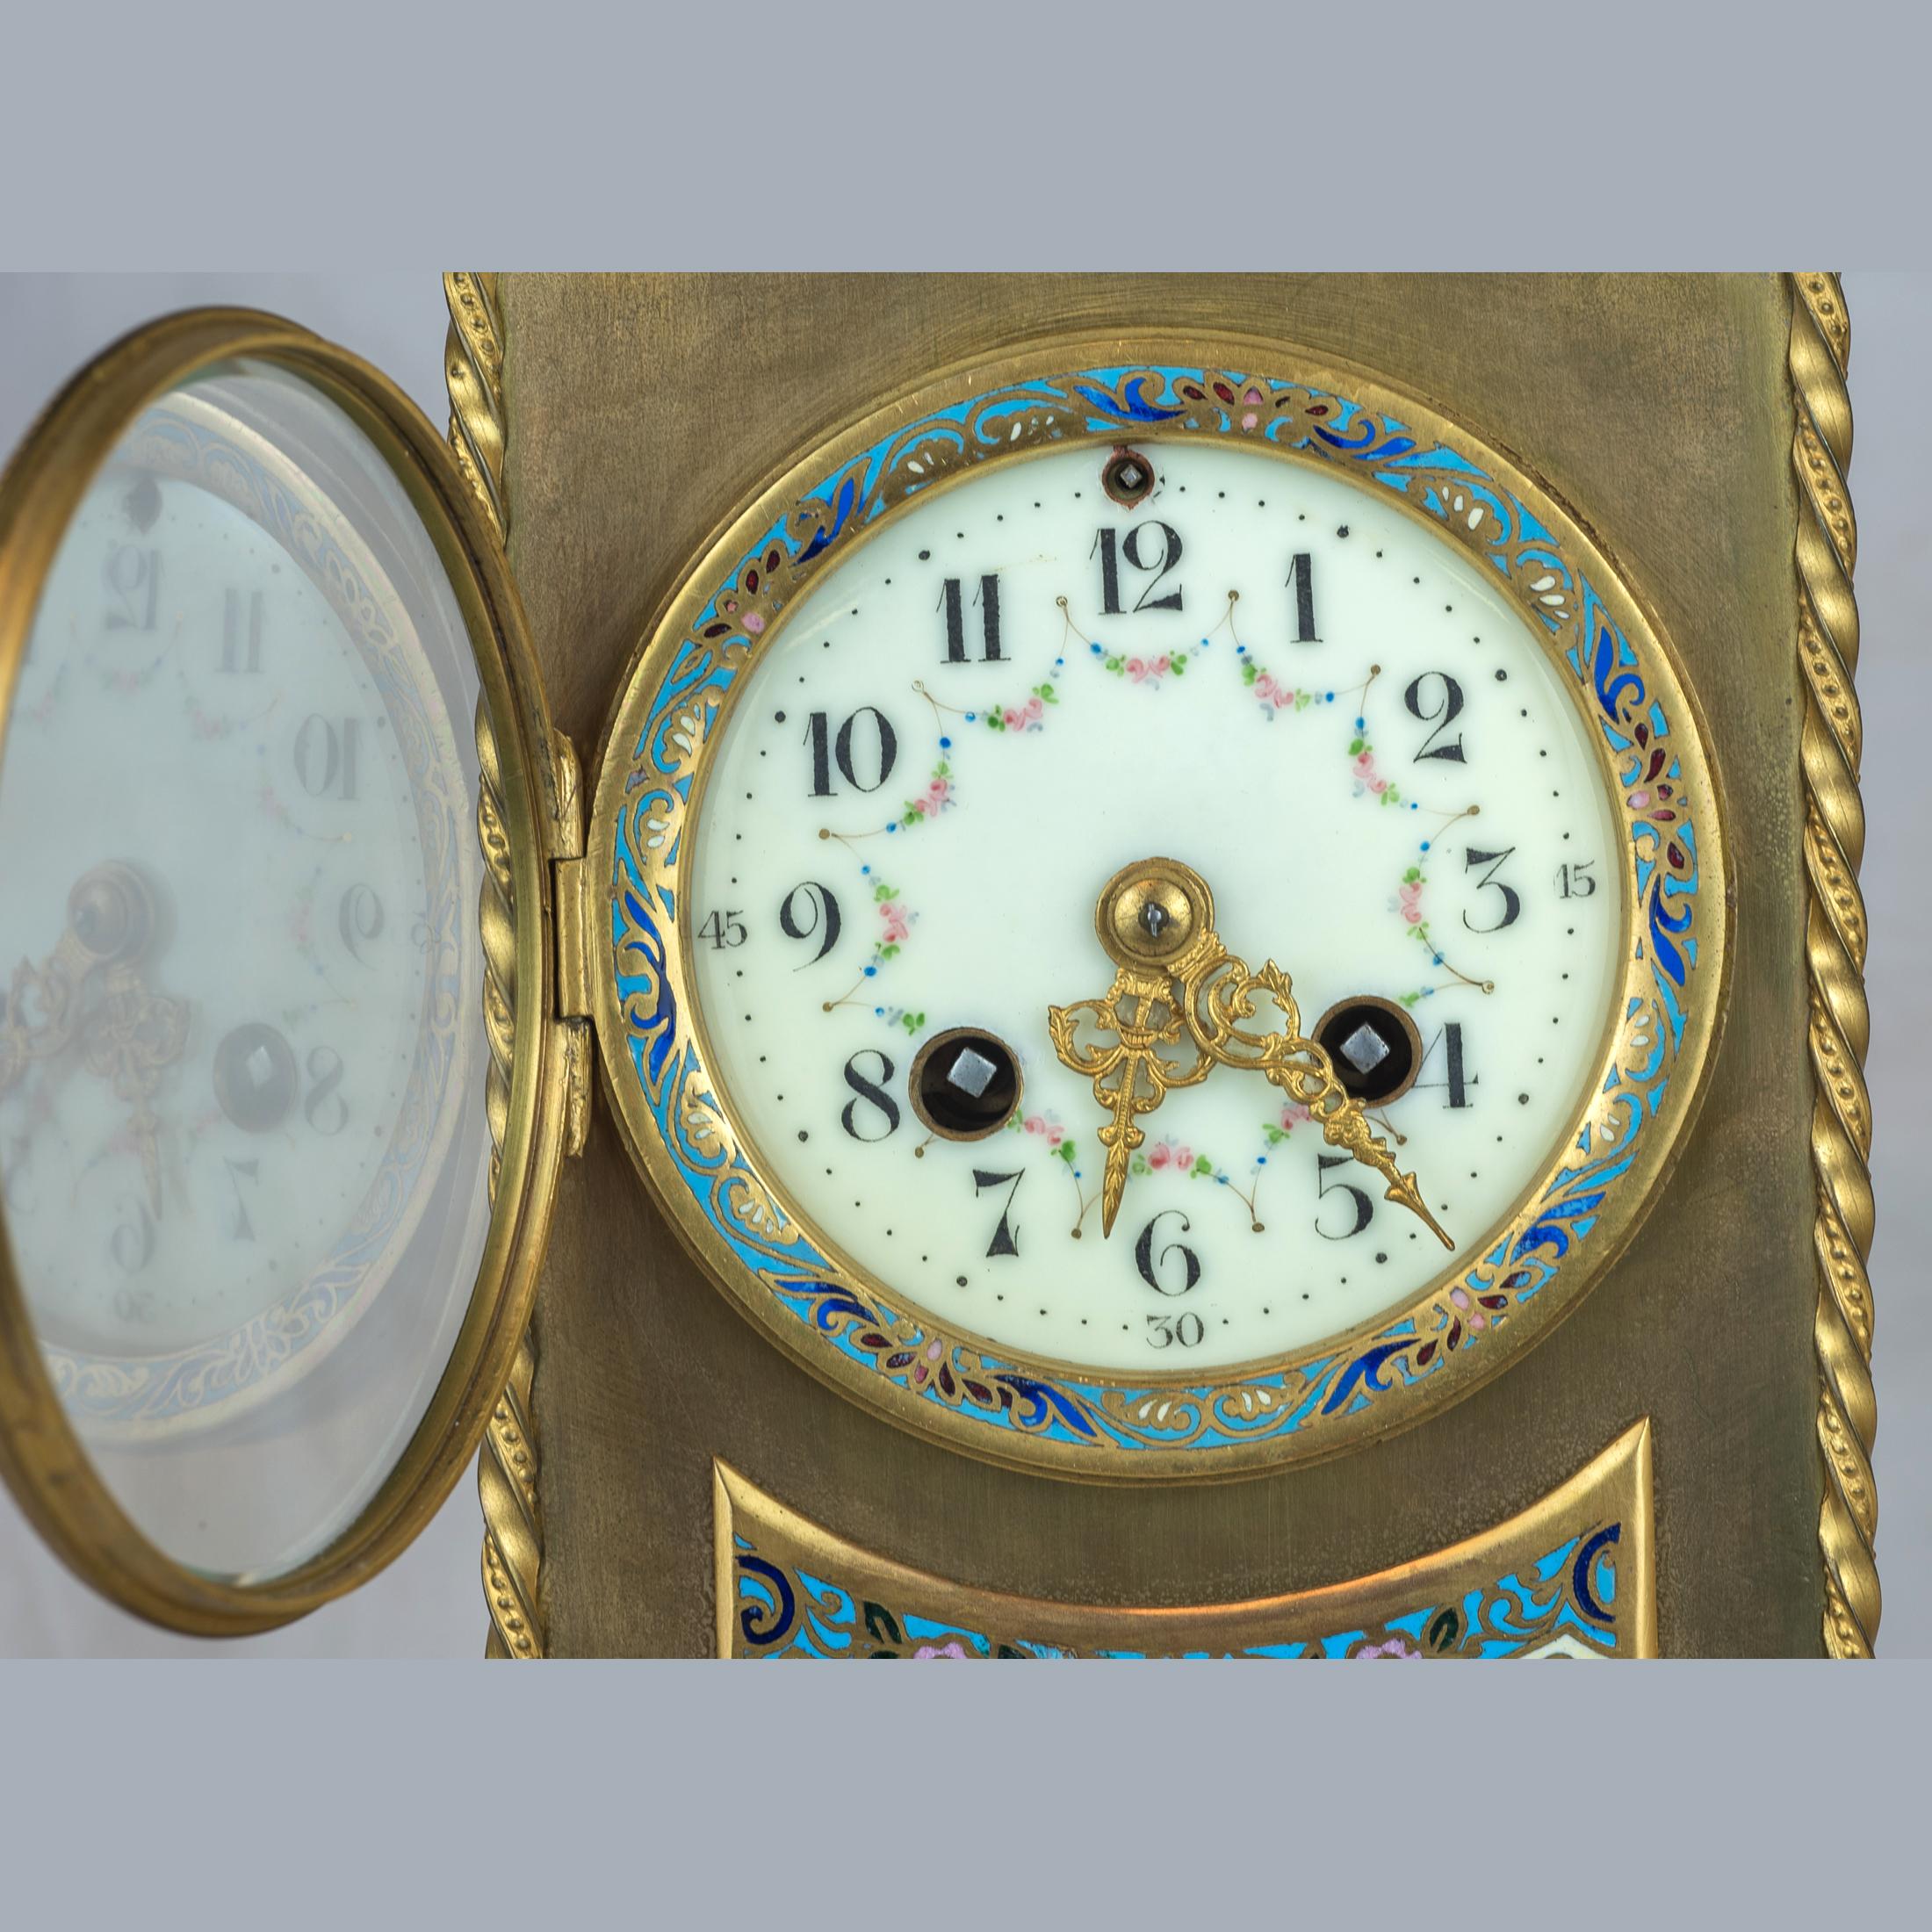 Fabulous Late 19th Century French Champleve Enamel and Gilt-Bronze Mantel Clock For Sale 3